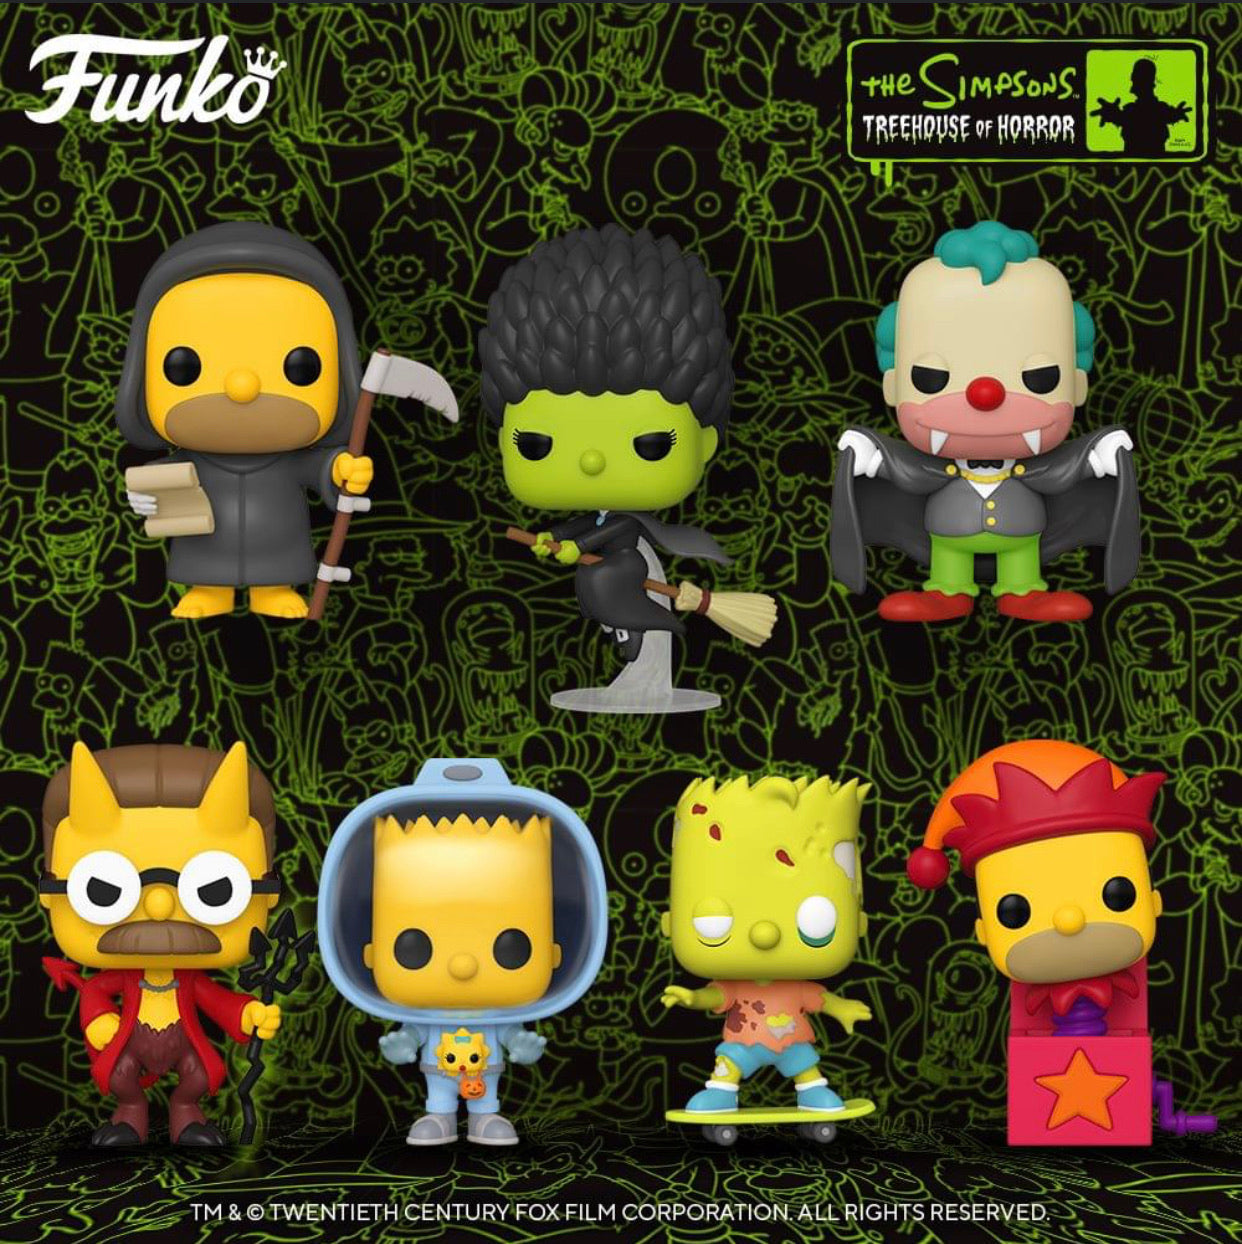 Pop! Animation: The Simpsons Treehouse S2(PREORDER)